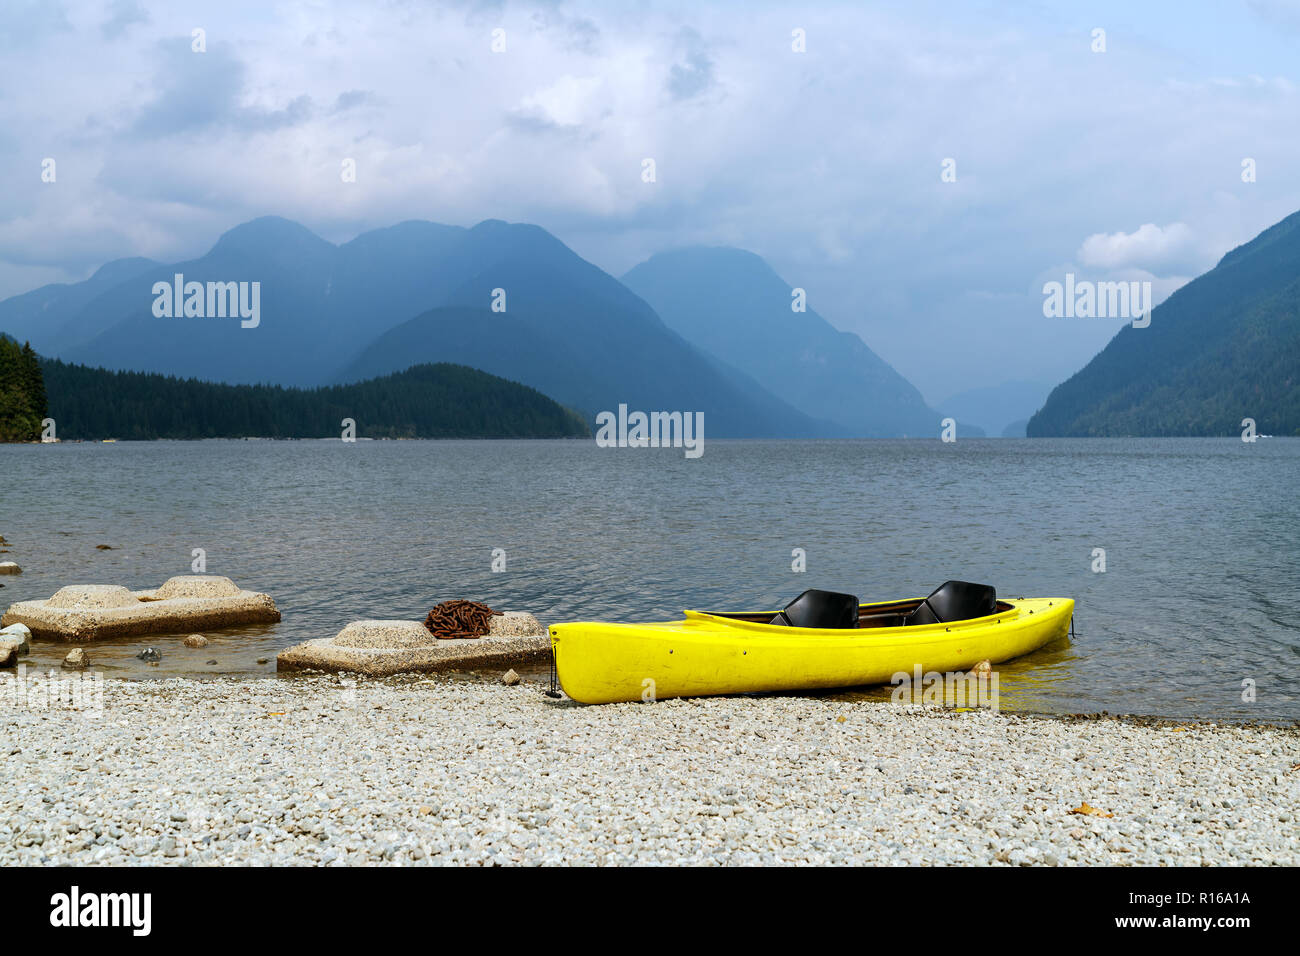 End of the summer, end of the season. Kayaks and canoes on the rack at Alouette Lake in Golden Ears Provincial Park in British Columbia, Canada Stock Photo